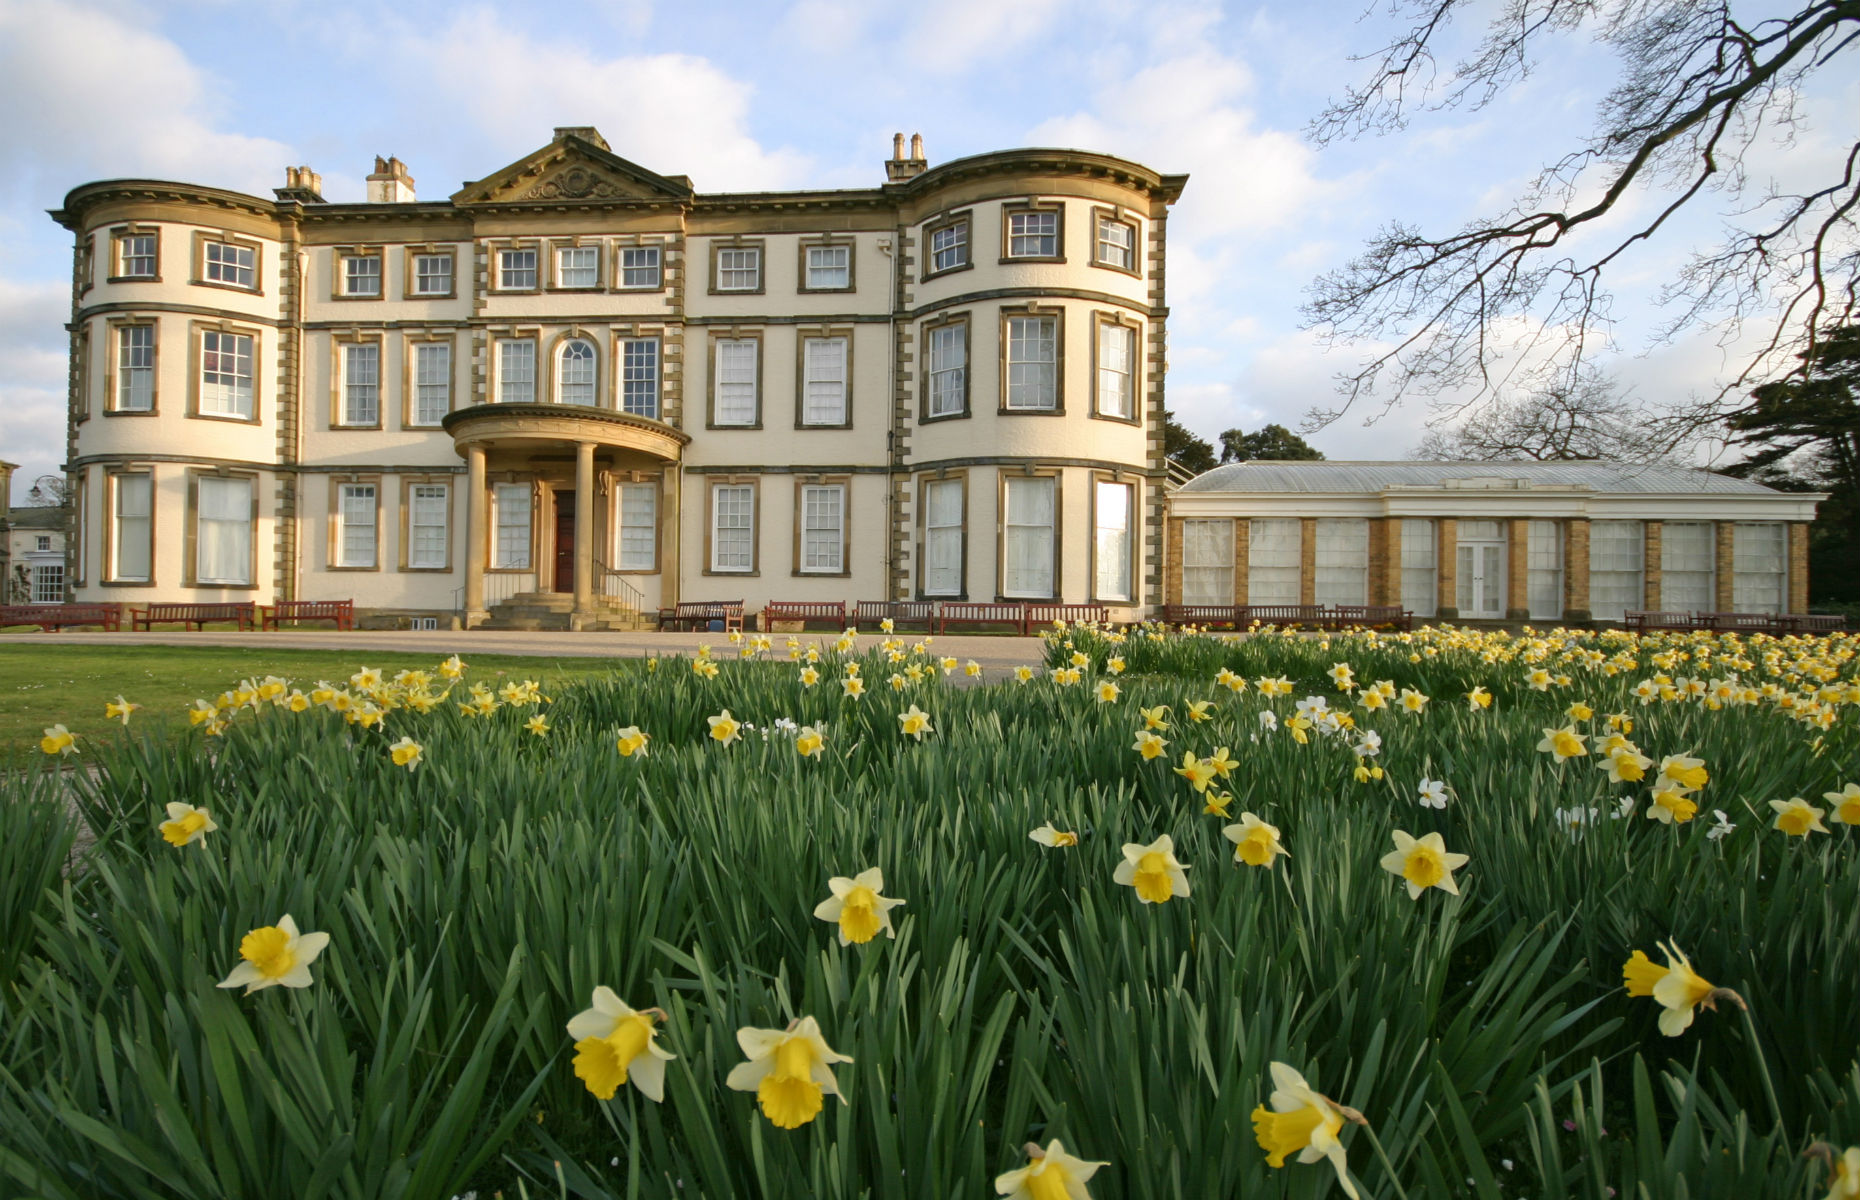 Sewerby Hall (Image: Gordon Ball LRPS/Shutterstock)